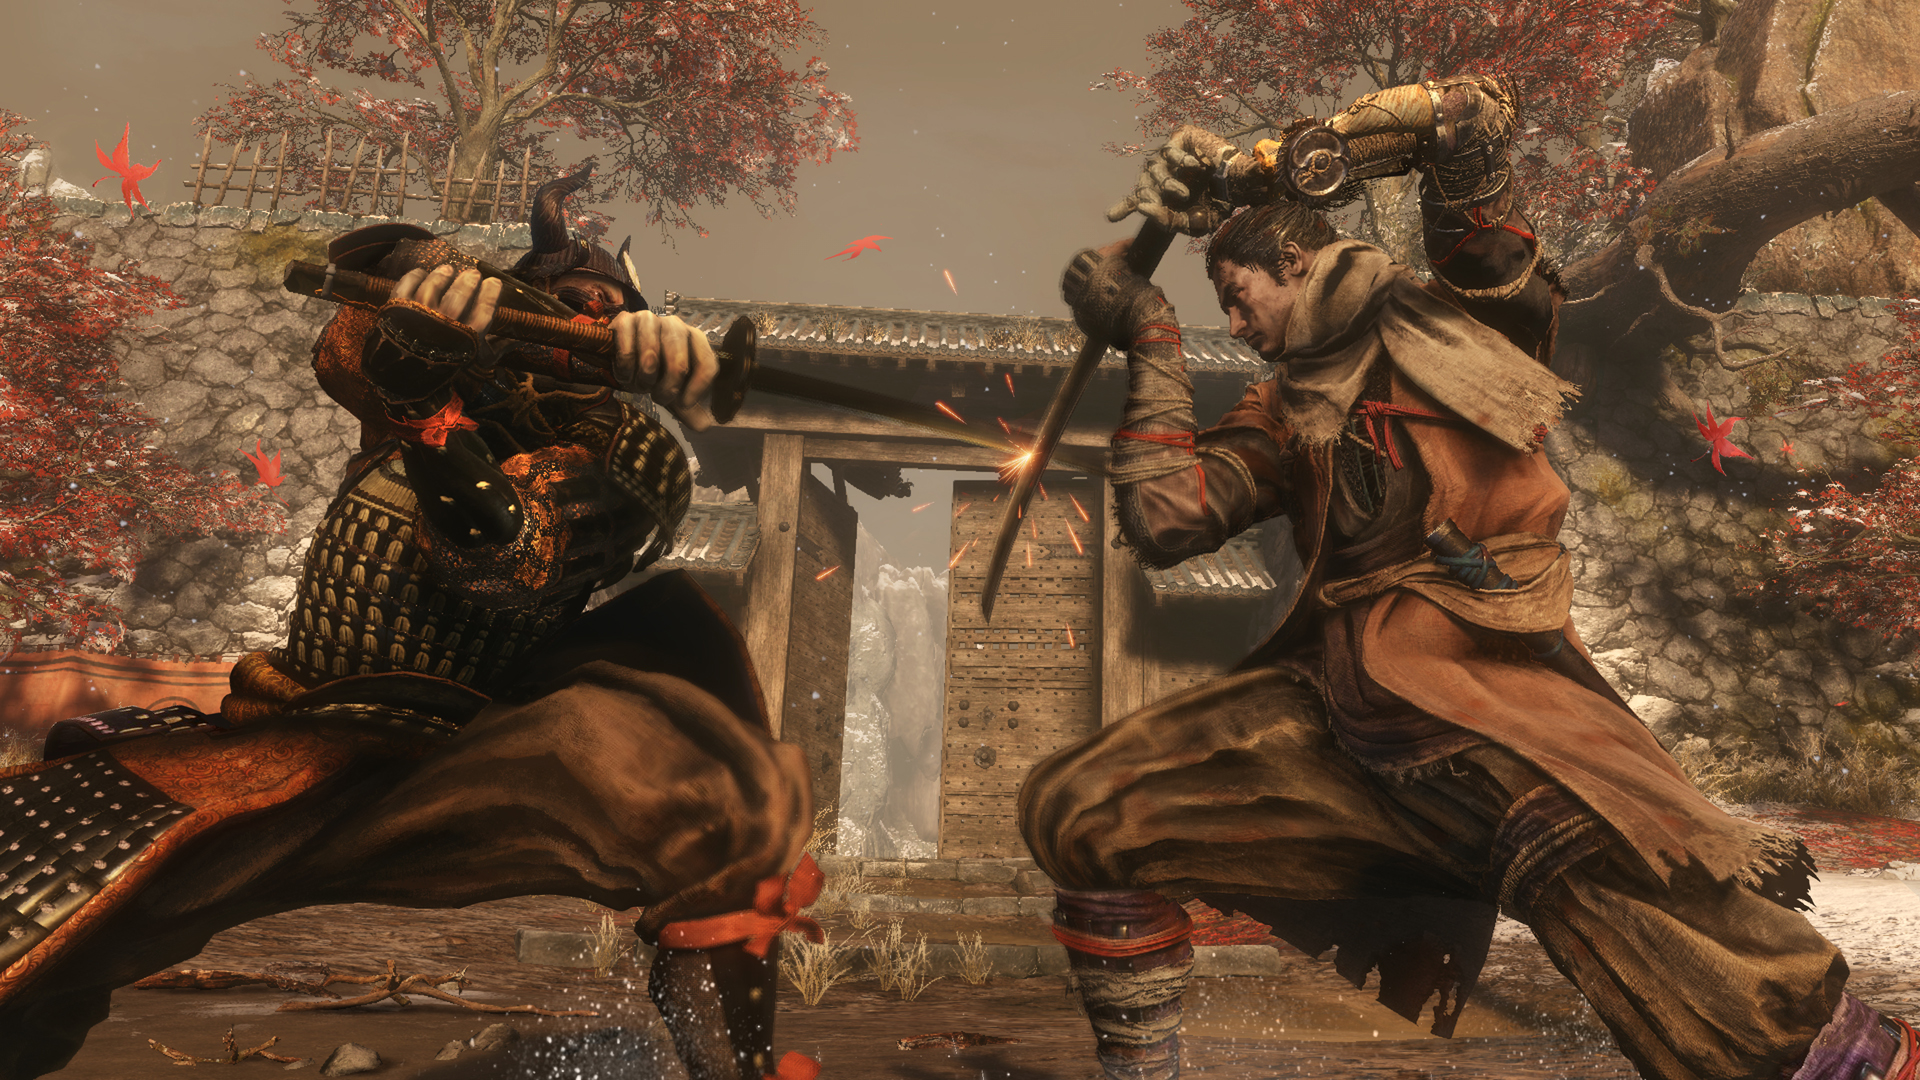 Sekiro: Shadows Die Twice sharpens the FromSoftware formula to a